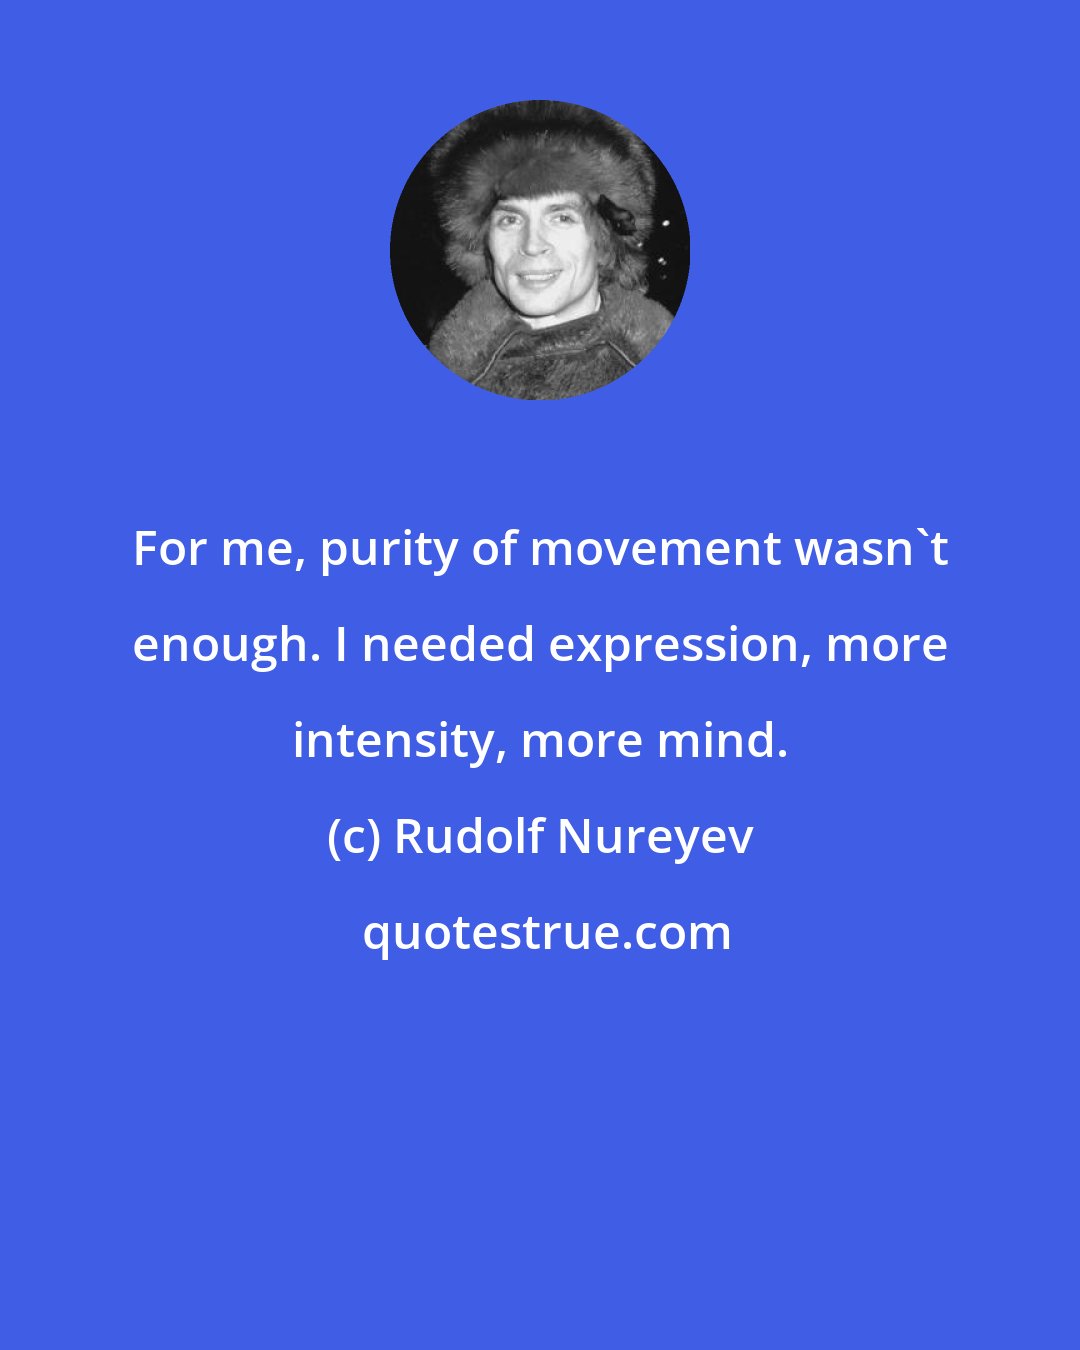 Rudolf Nureyev: For me, purity of movement wasn't enough. I needed expression, more intensity, more mind.